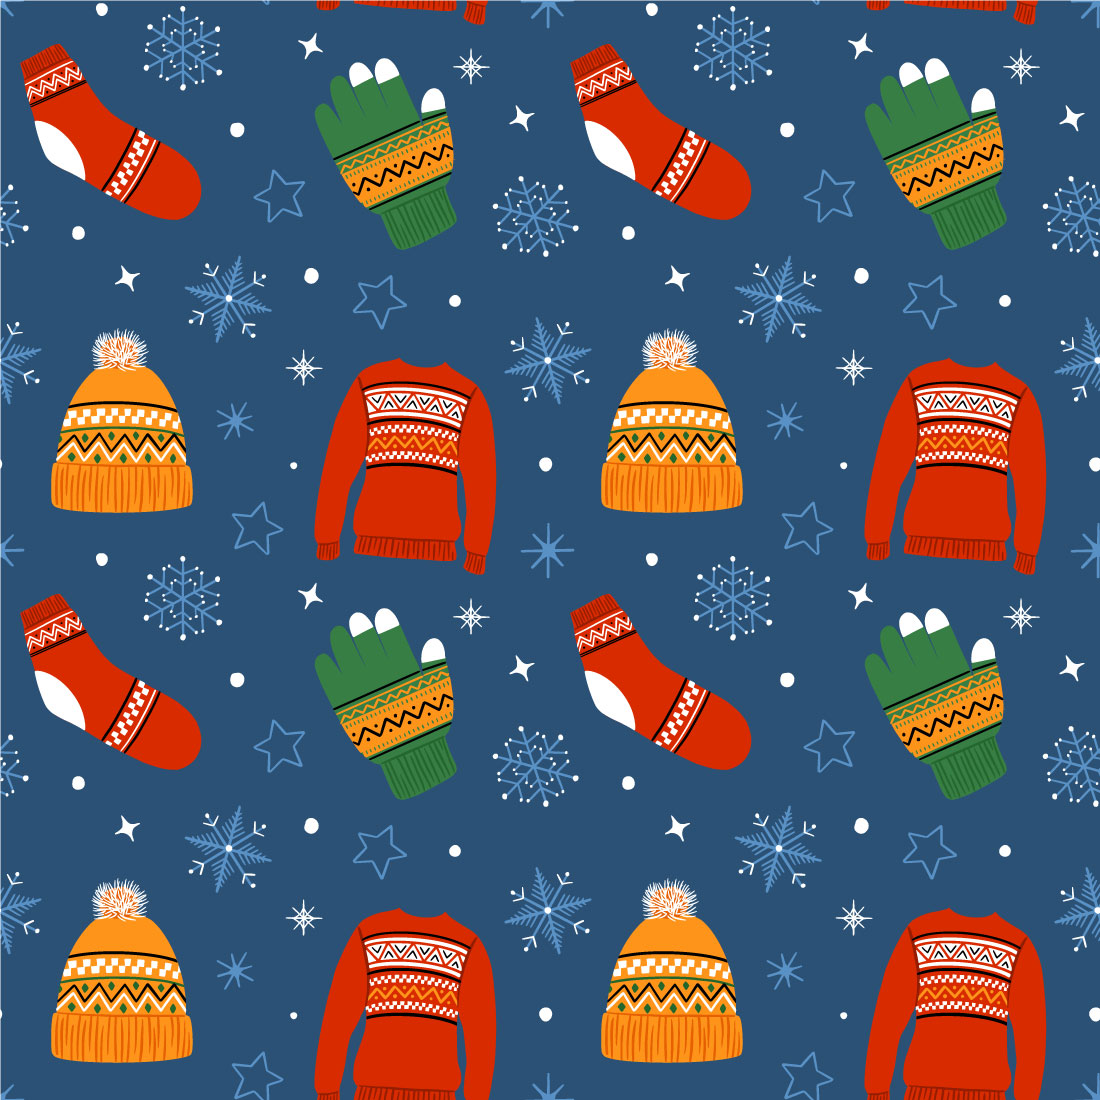 Christmas Seamless Pattern Design in Vector cover image.